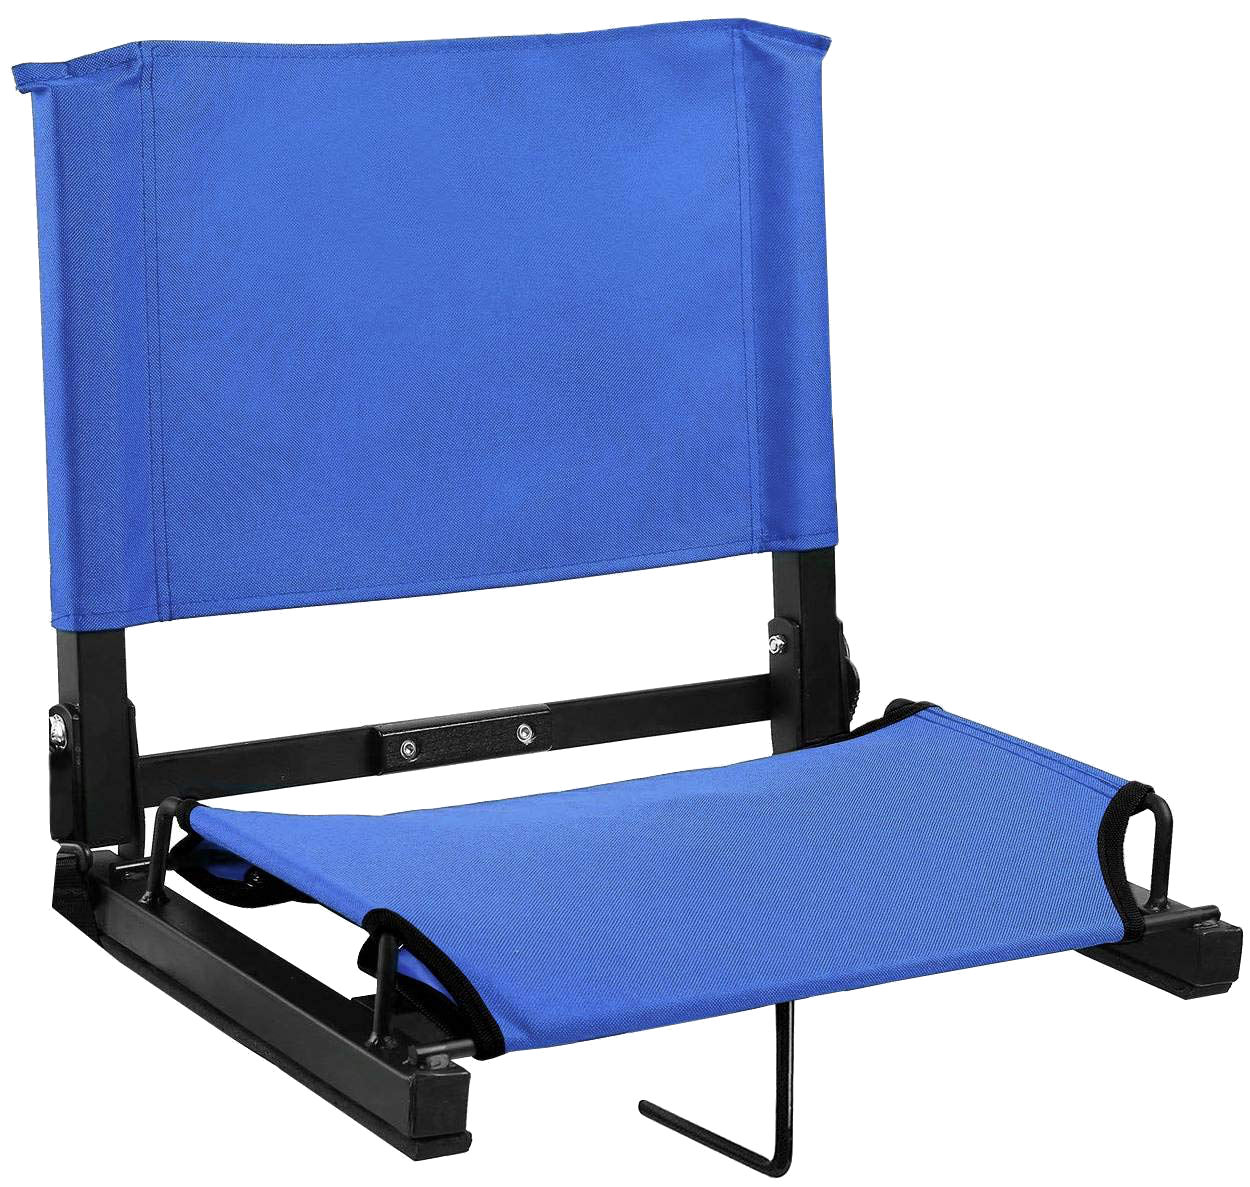 https://www.ambromanufacturing.com/wp-content/uploads/2019/09/stadium-seat-for-bleachers.png